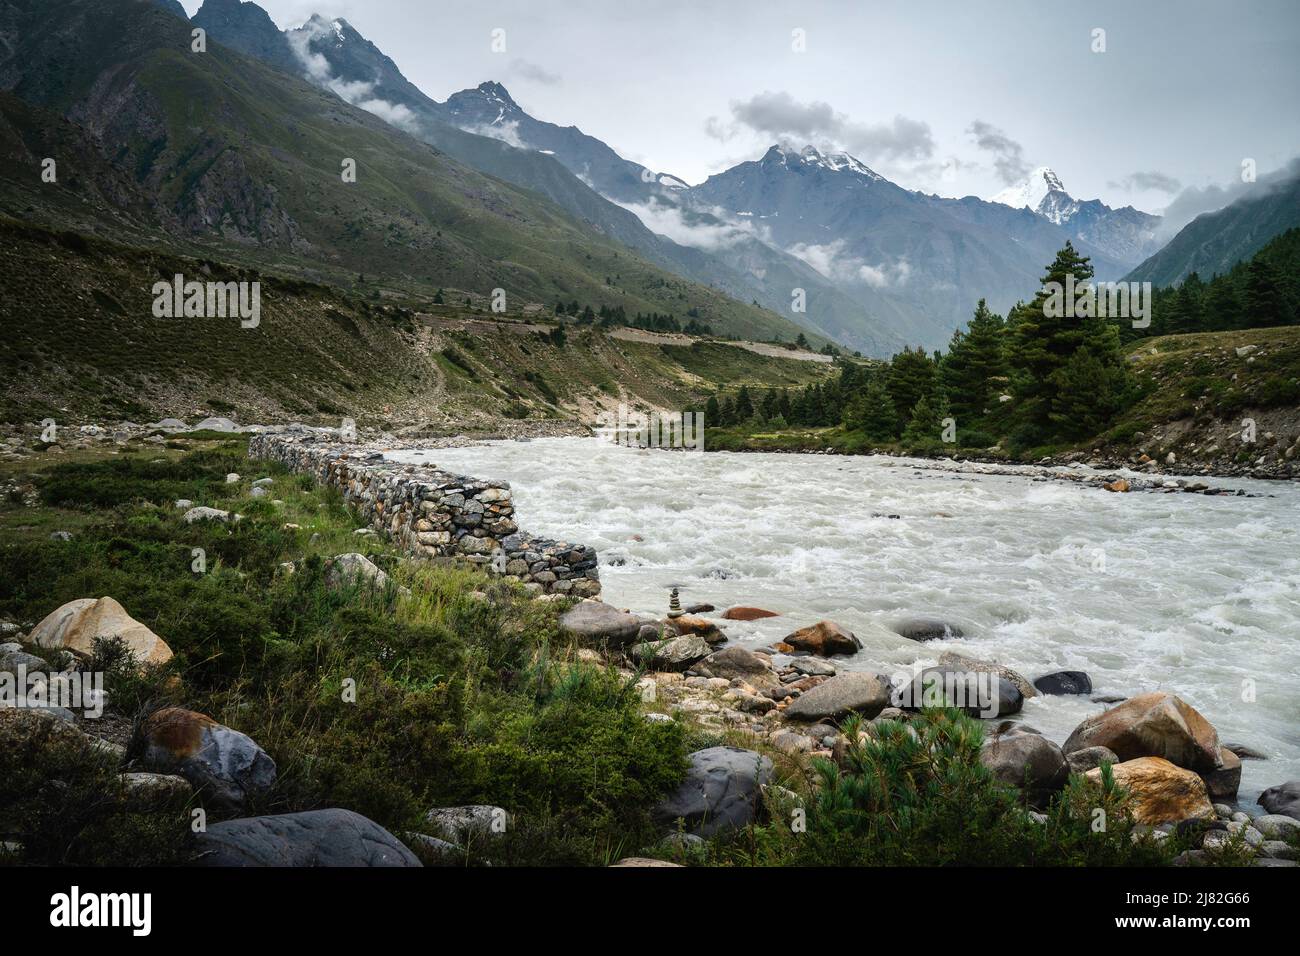 Baspa river flanked by boulders, trees, and the Himalayas with peaks shrouded in clouds under overcast sky in summer in Chitkul, India. Stock Photo